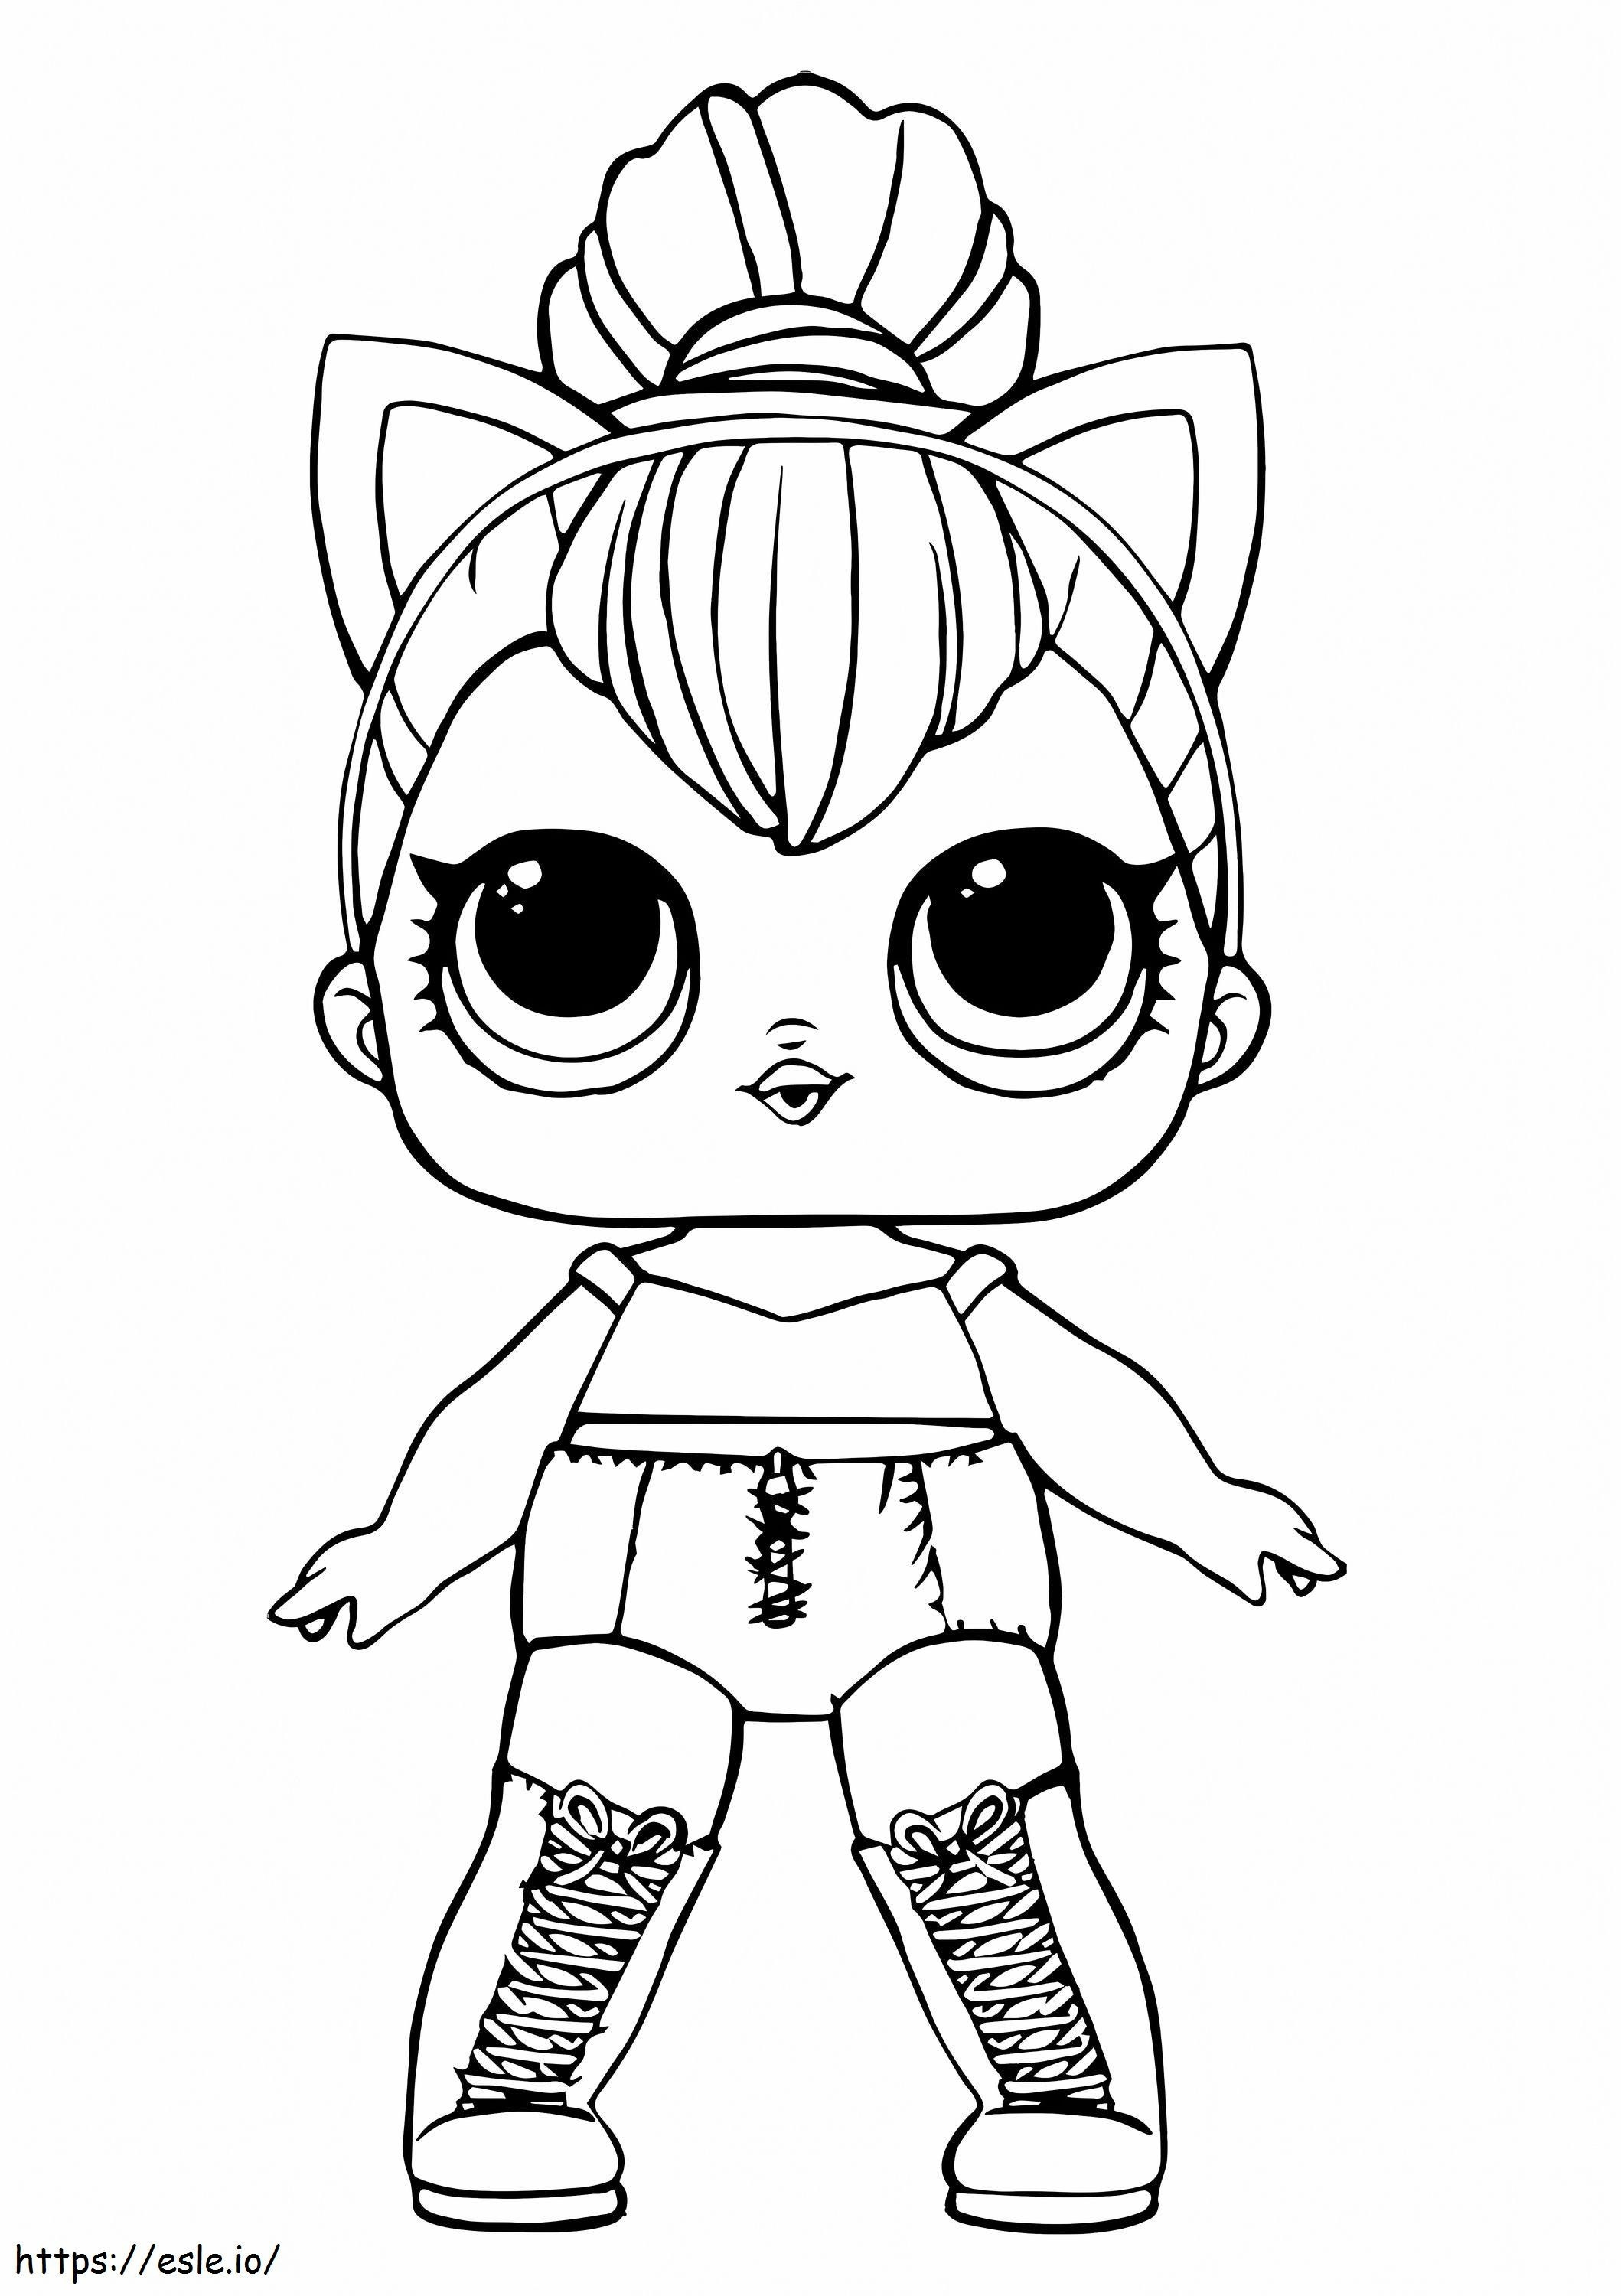 1572655881 Lol Doll Kitty Queen coloring page